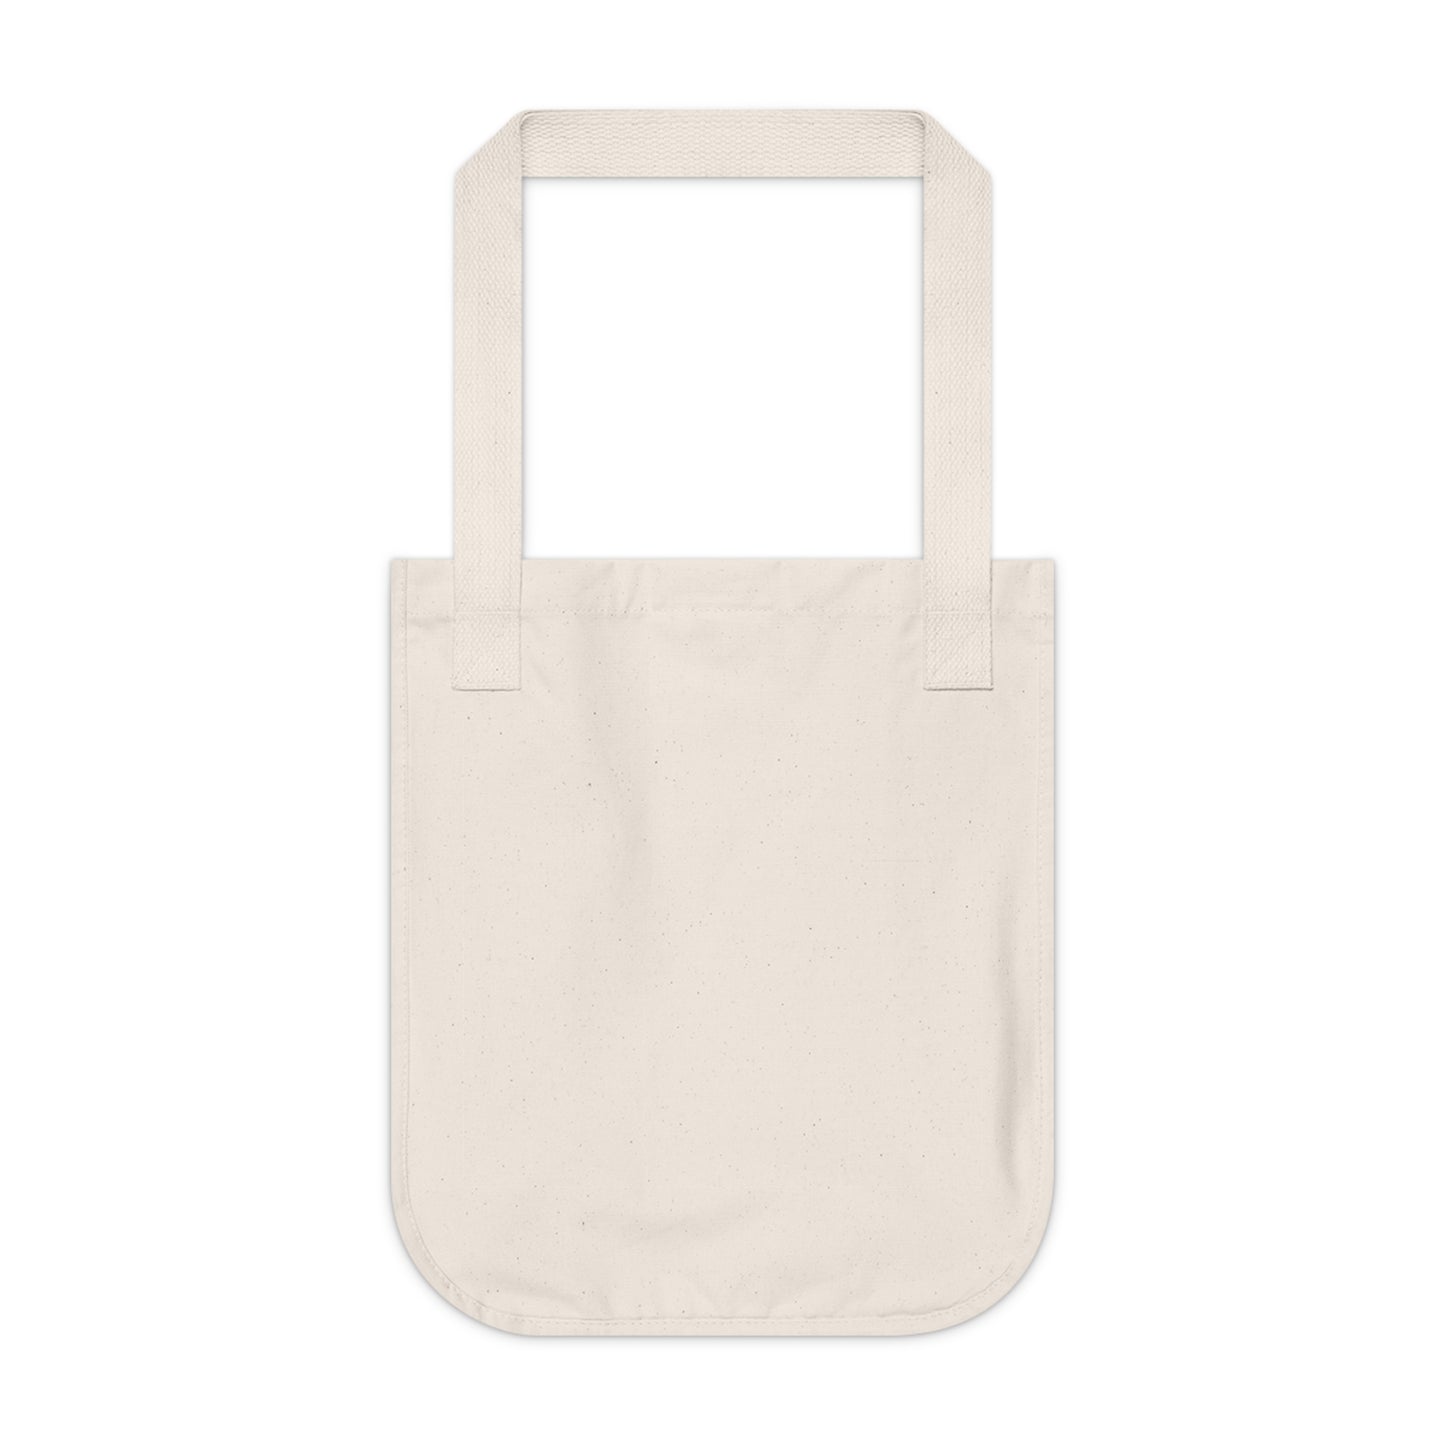 "Nature in Art: Capturing the Essence of a Special Place" - Bam Boo! Lifestyle Eco-friendly Tote Bag